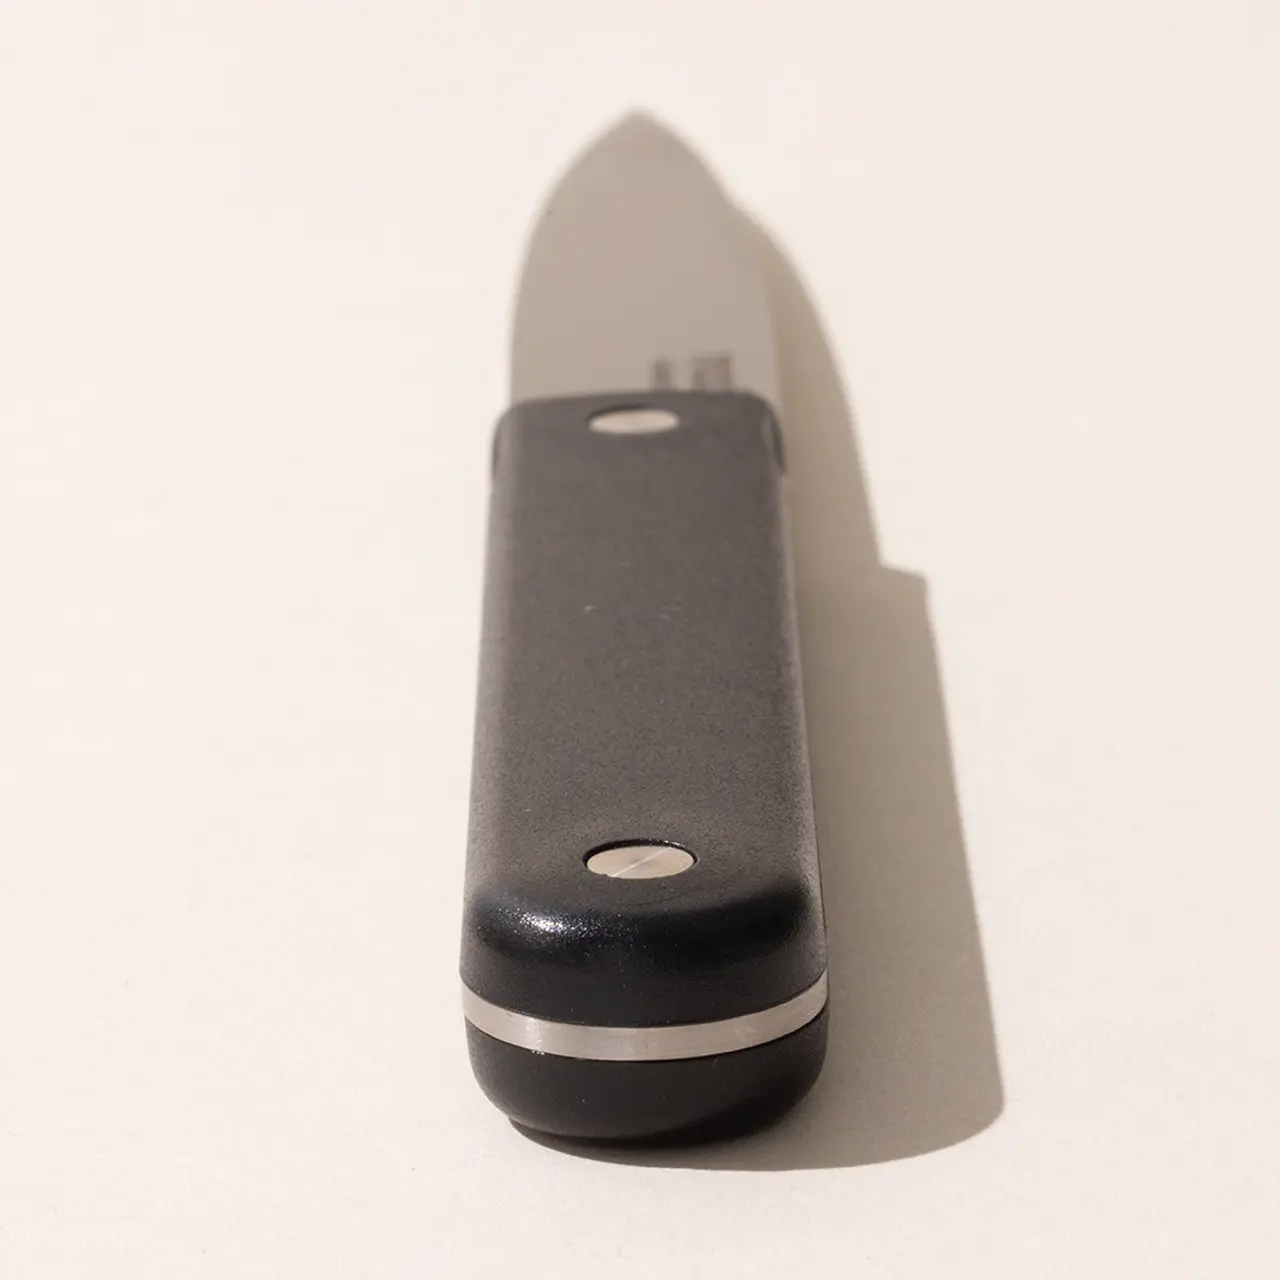 A folding pocket knife with a black handle is partially opened on a light background.